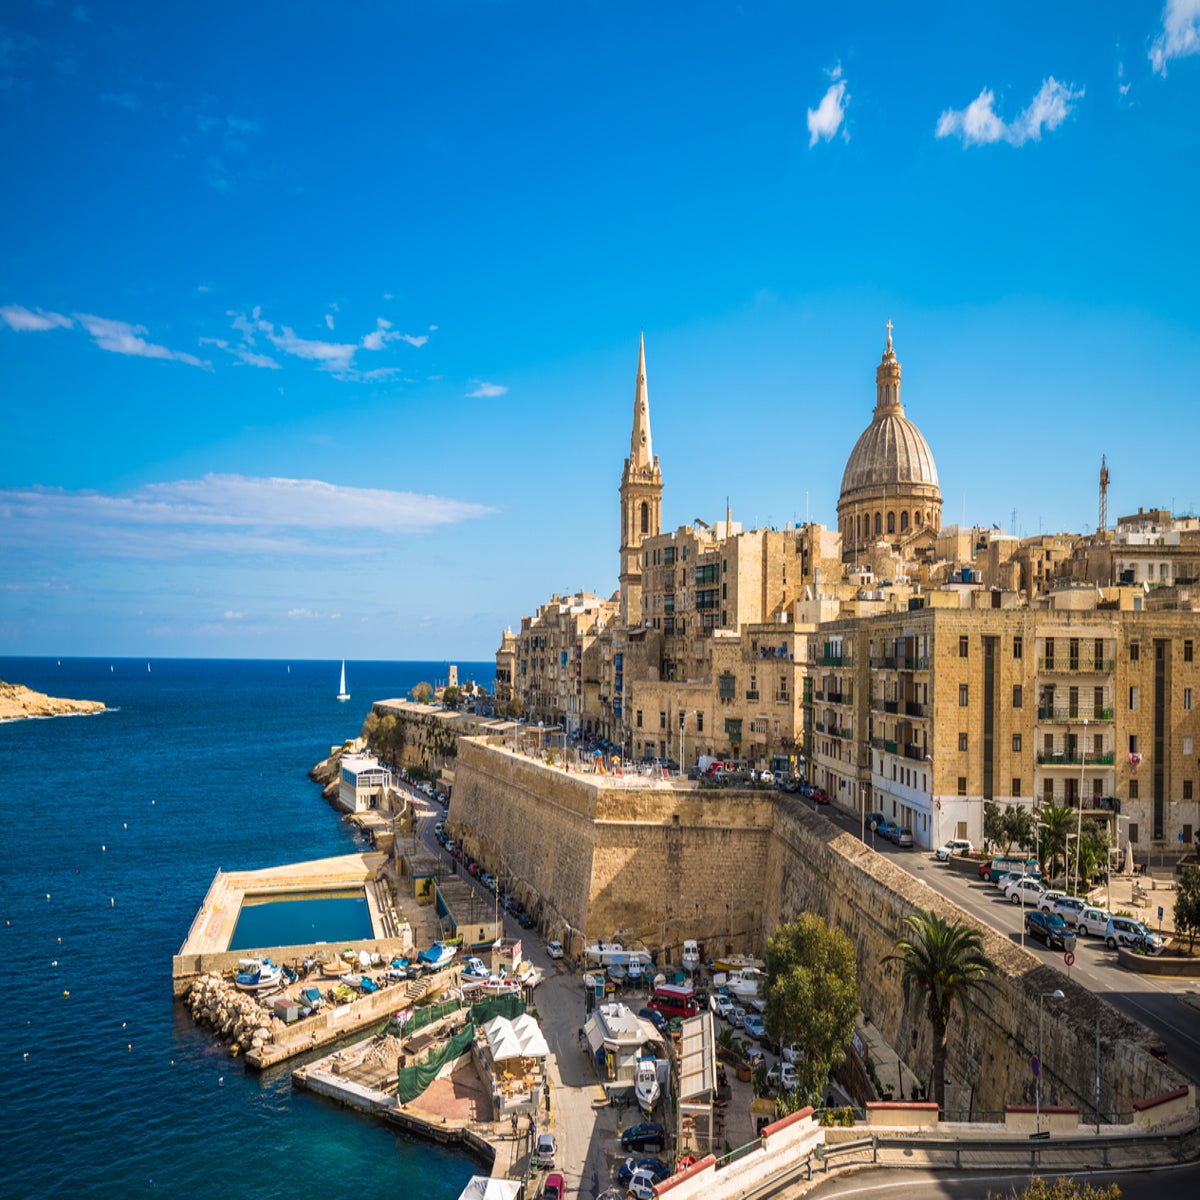 Malta travel guide: Everything you need to know before you go